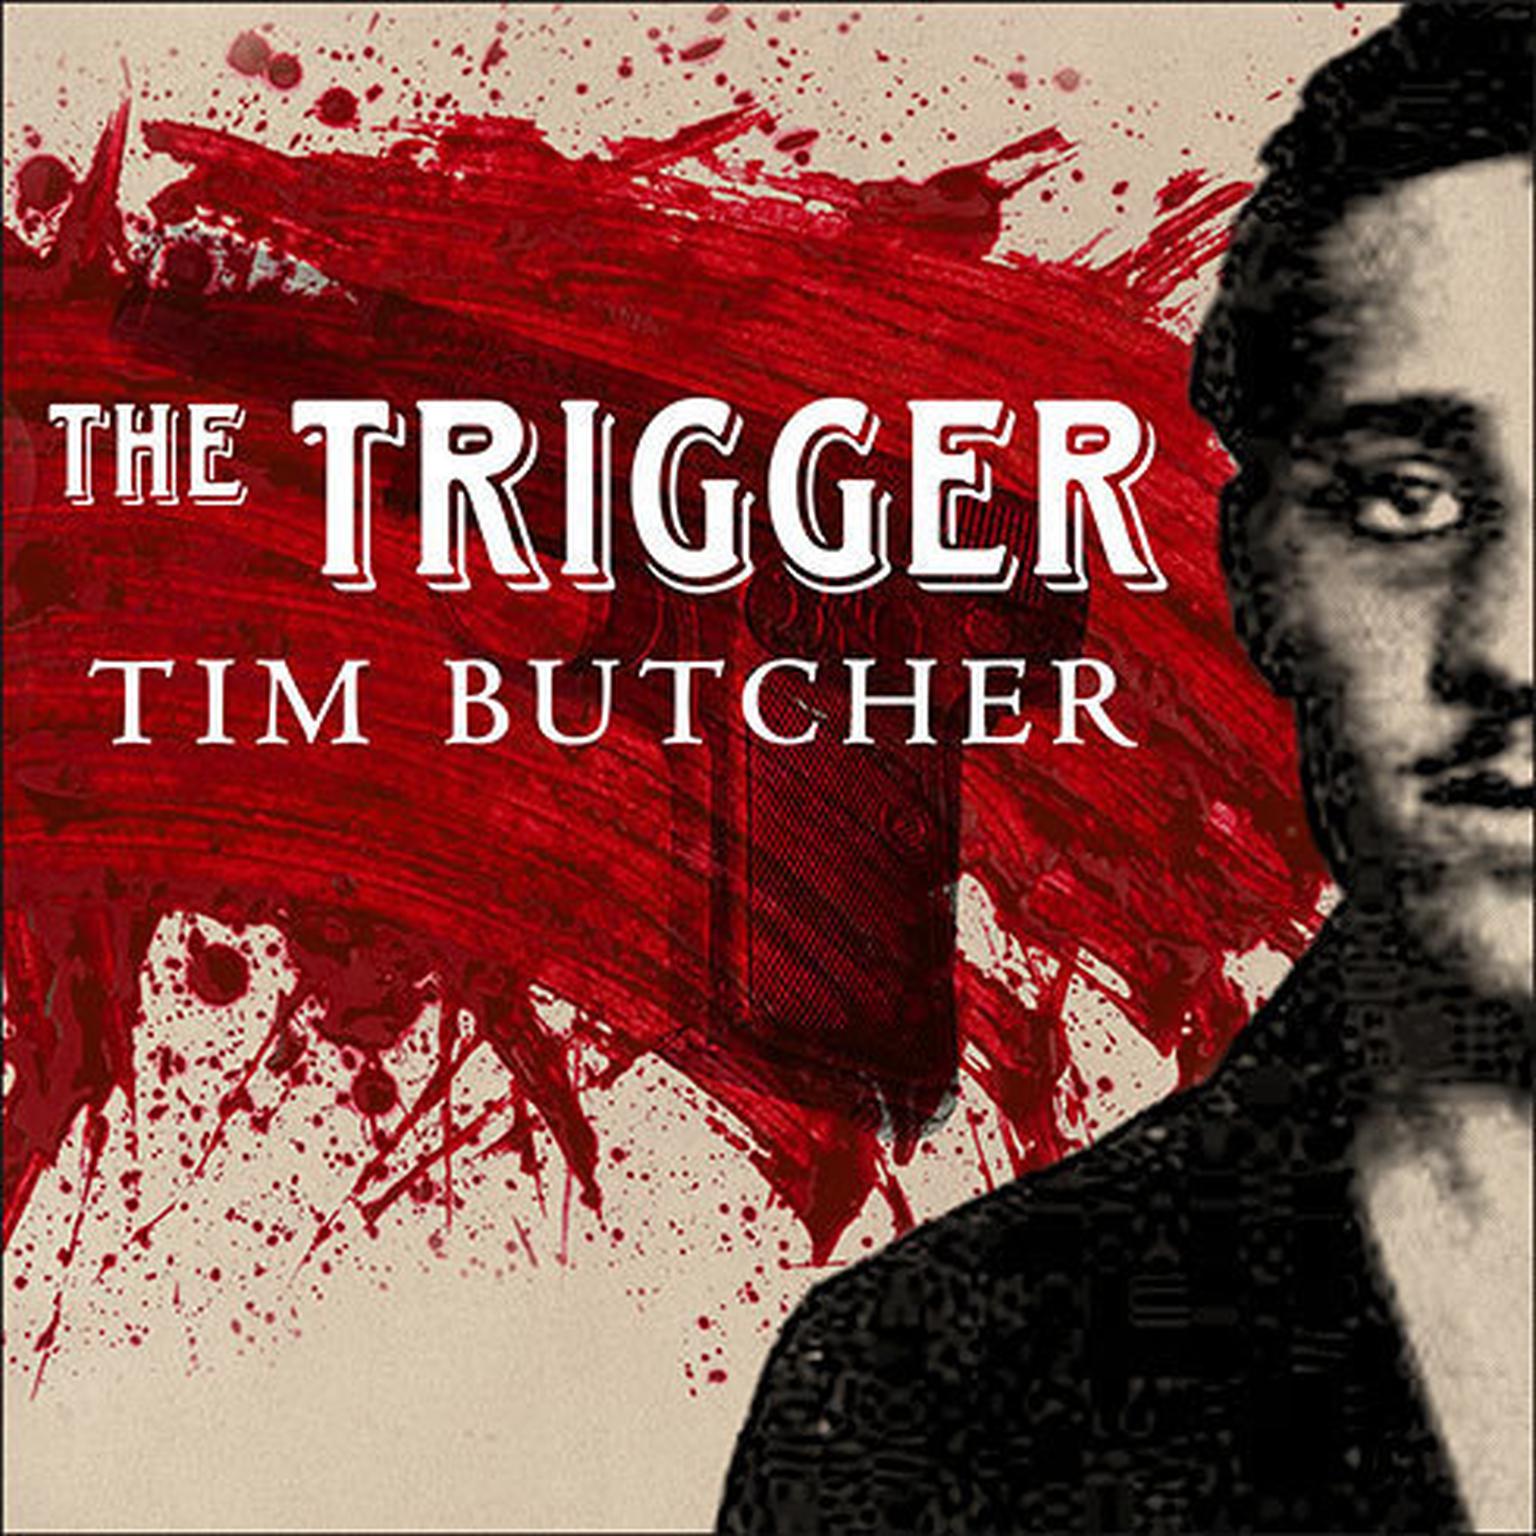 The Trigger by Tim Butcher